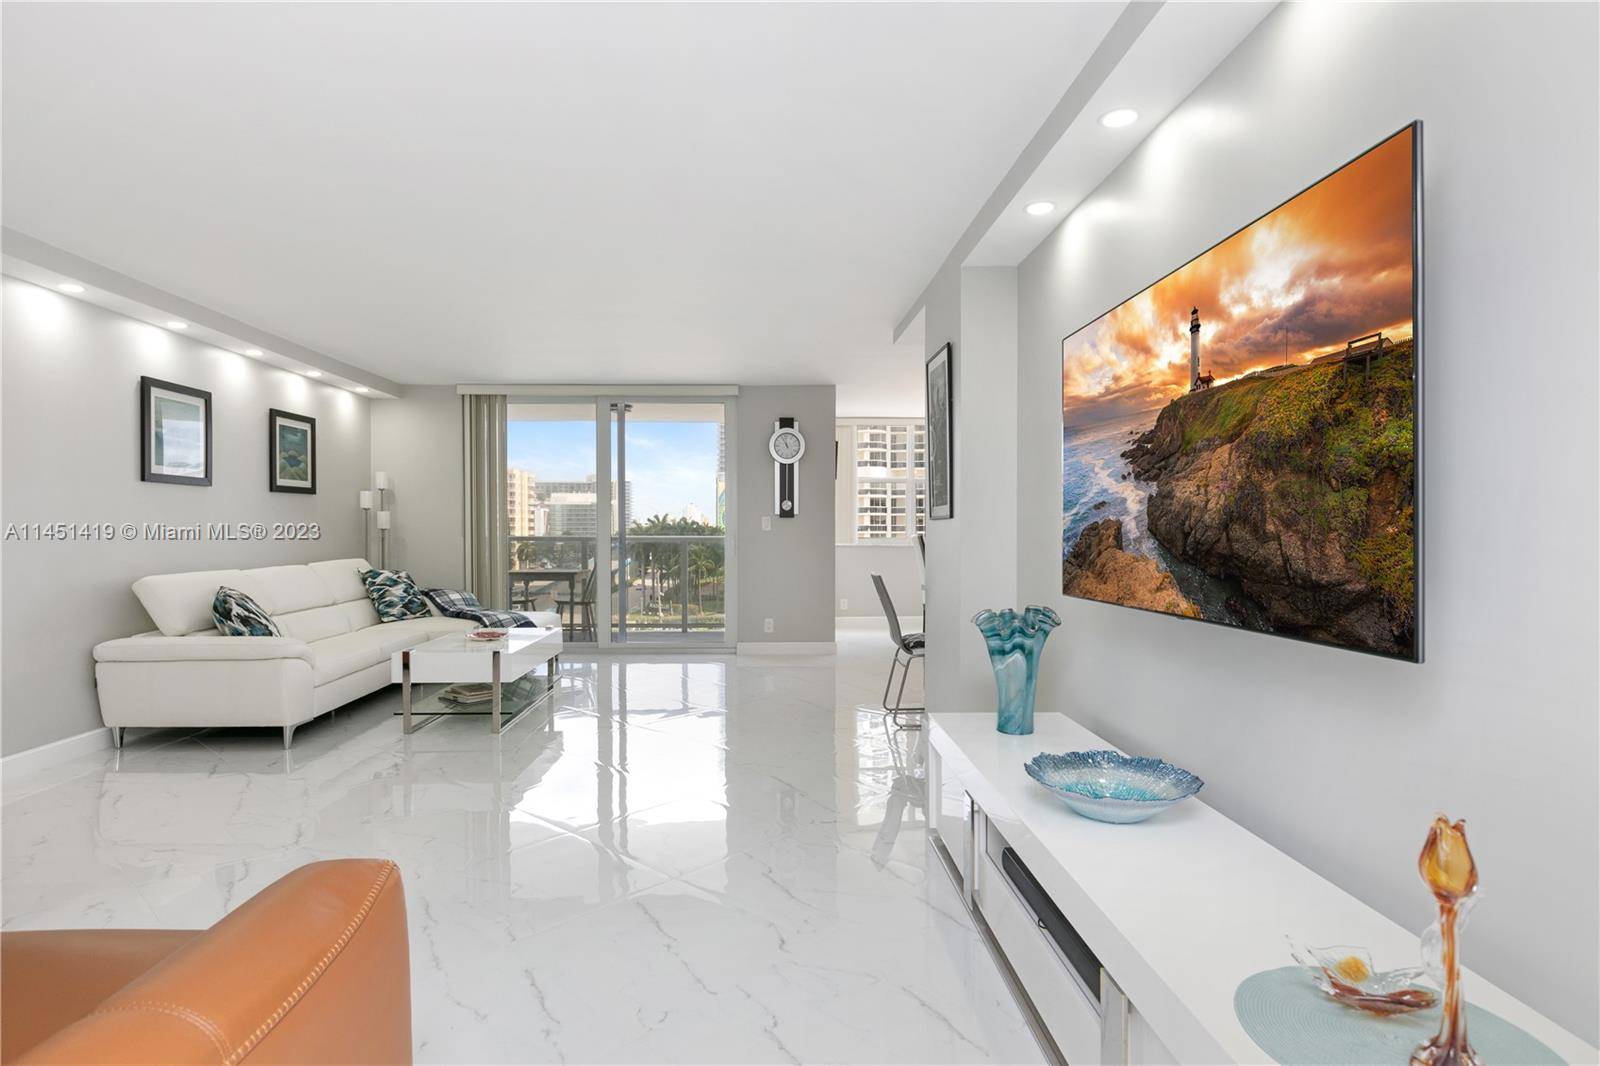 Experience the luxury of beachfront living in this stunning 2 bedroom 2 bathroom ocean front condo, completely renovated to perfection with high end finishes and sophisticated design.